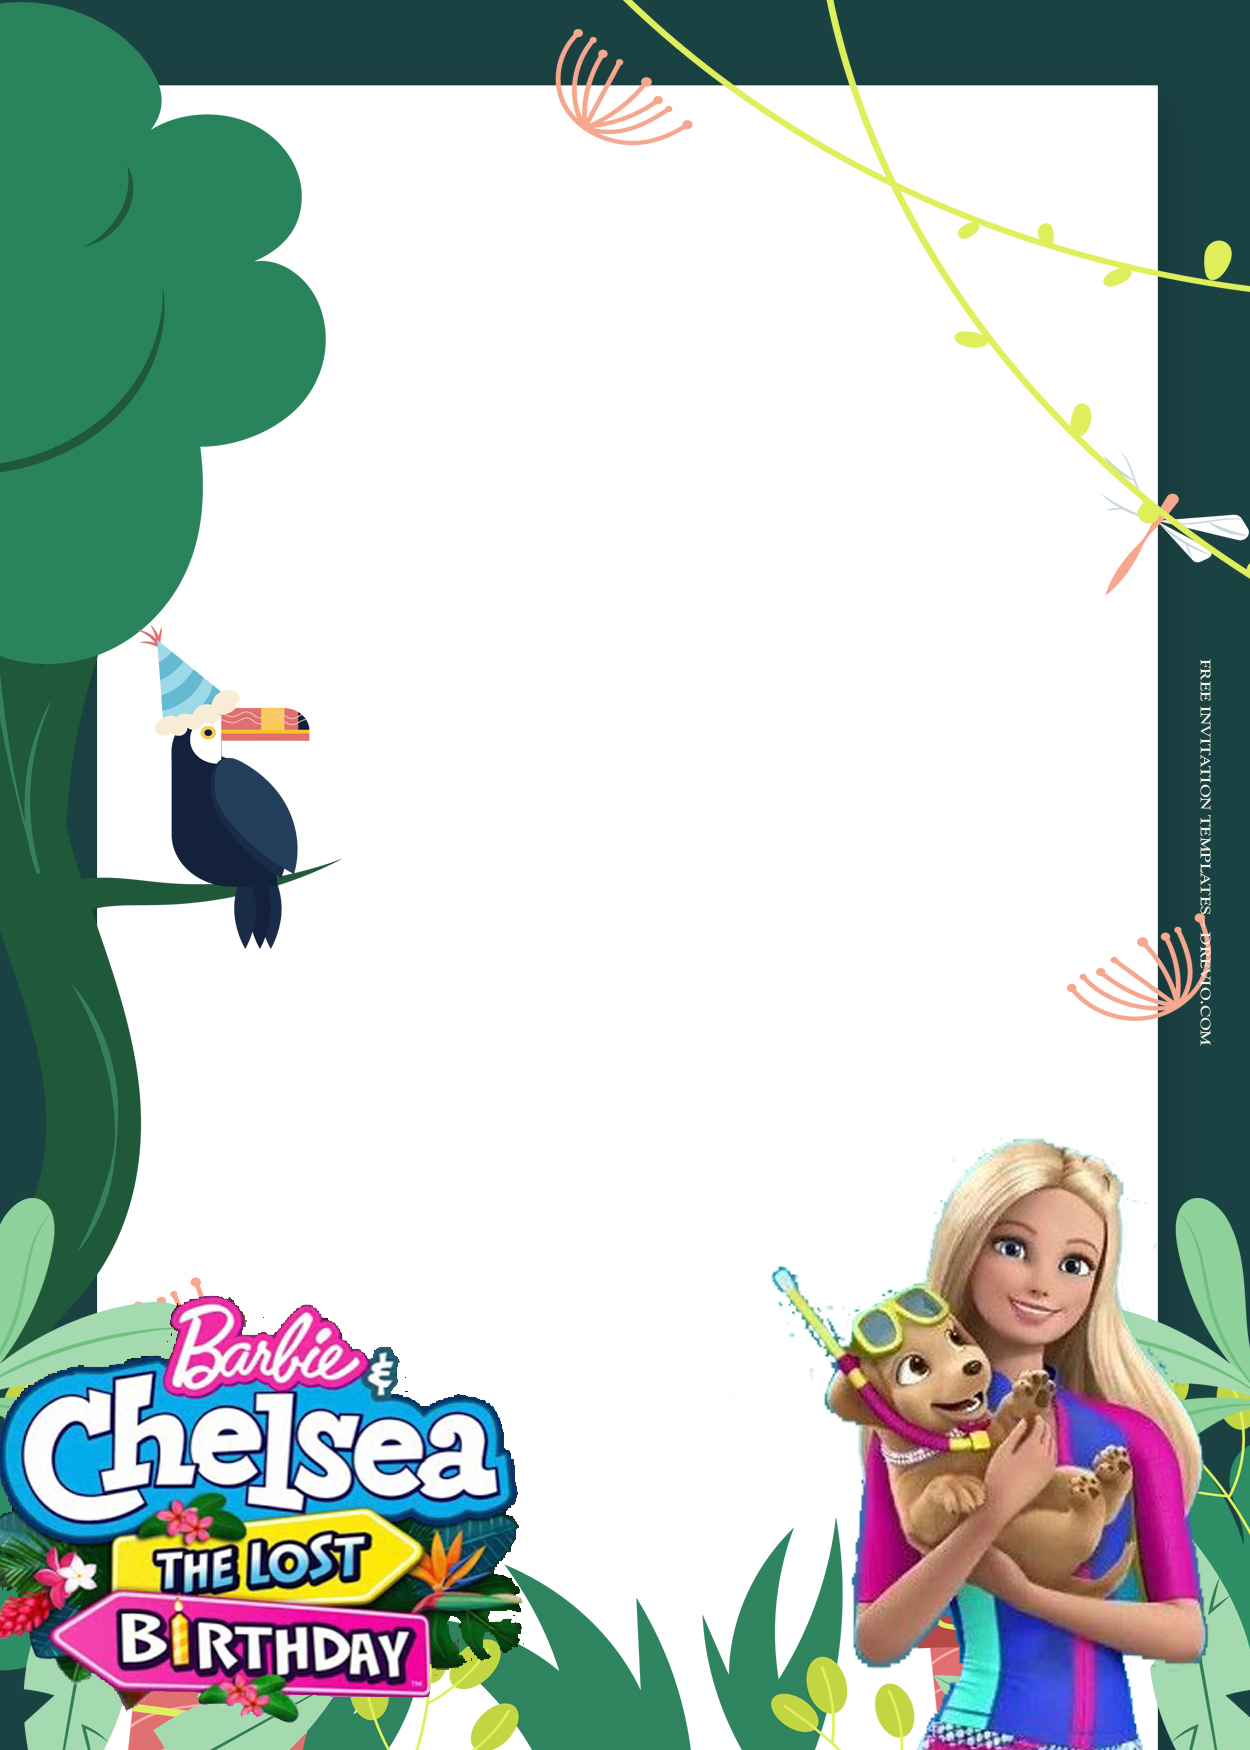 8+ Barbie And Chelsea The Lost Birthday Invitation Templates Five